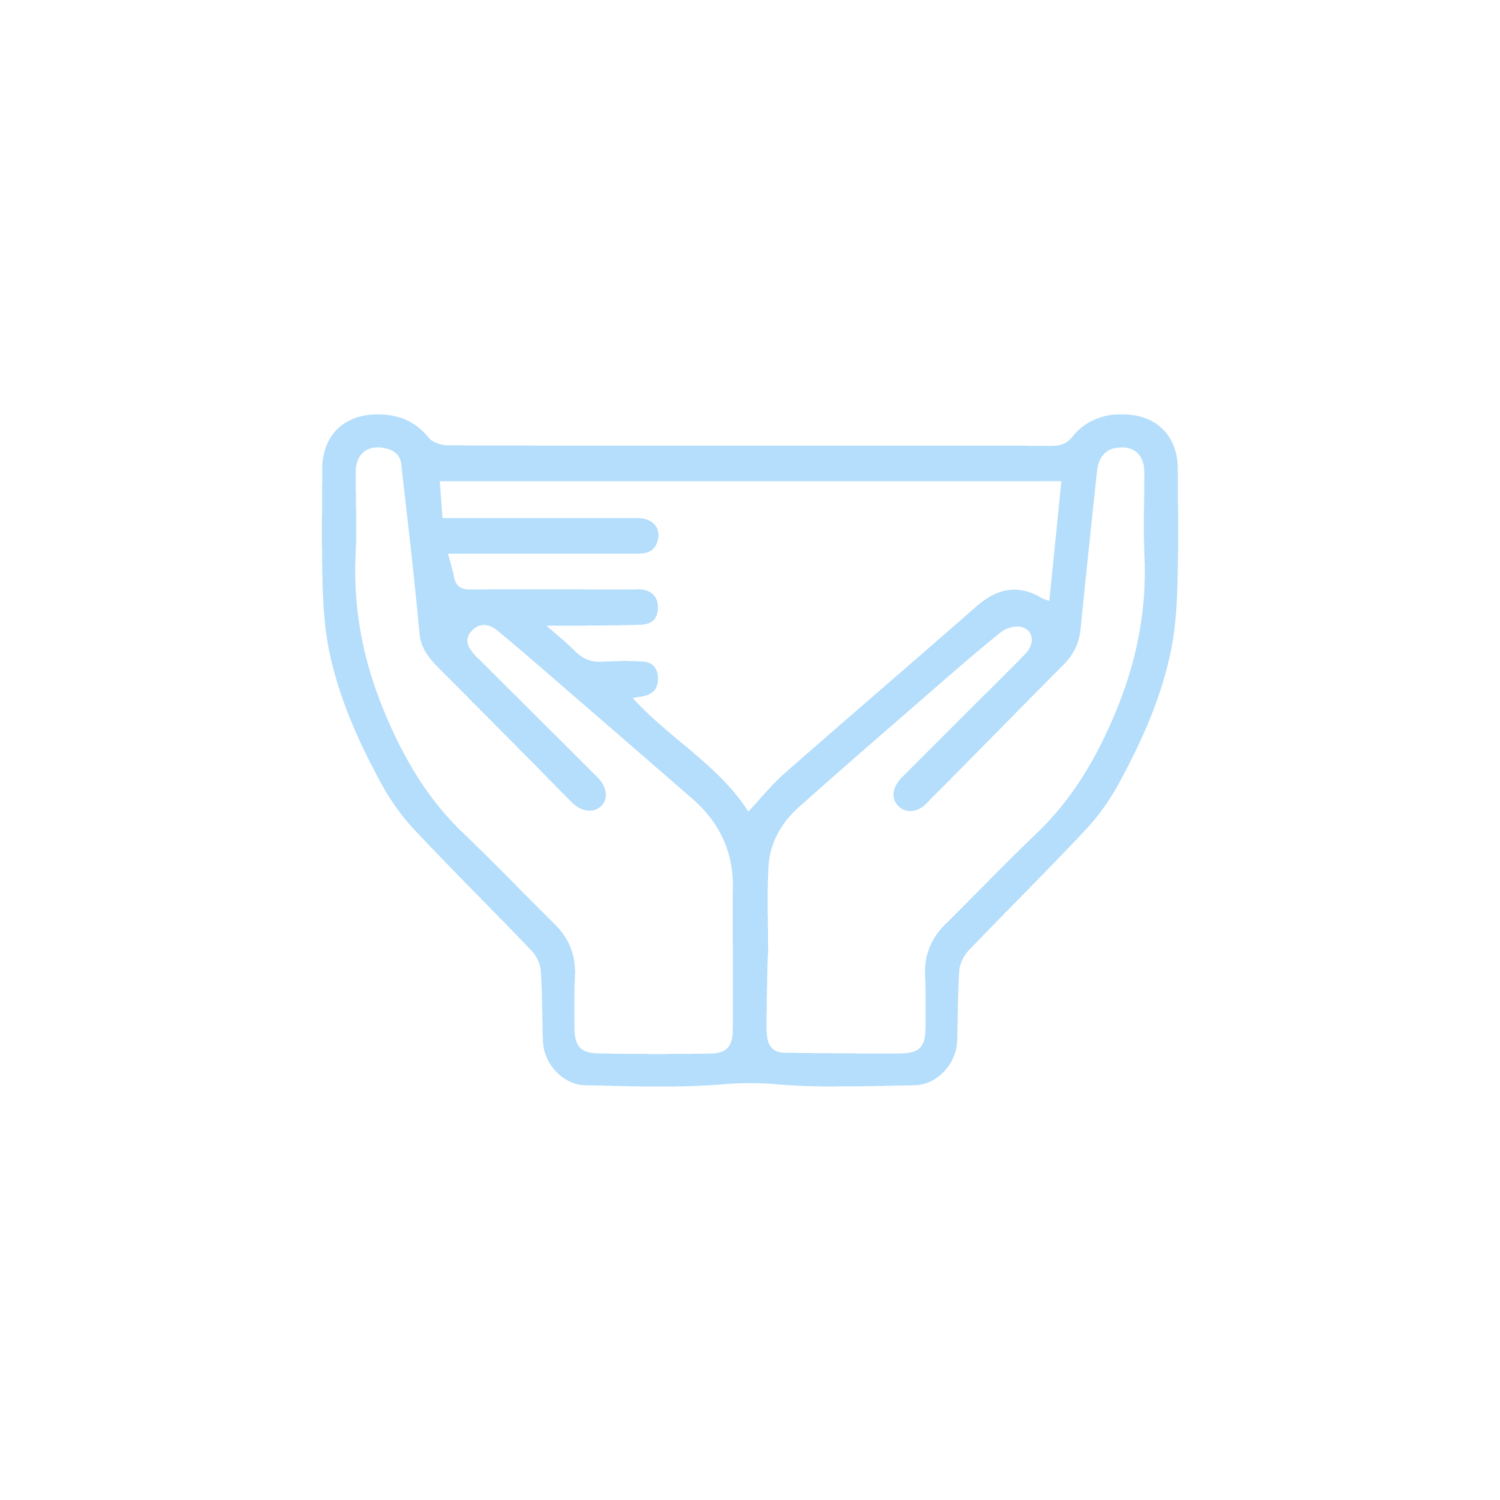 Project Isaiah